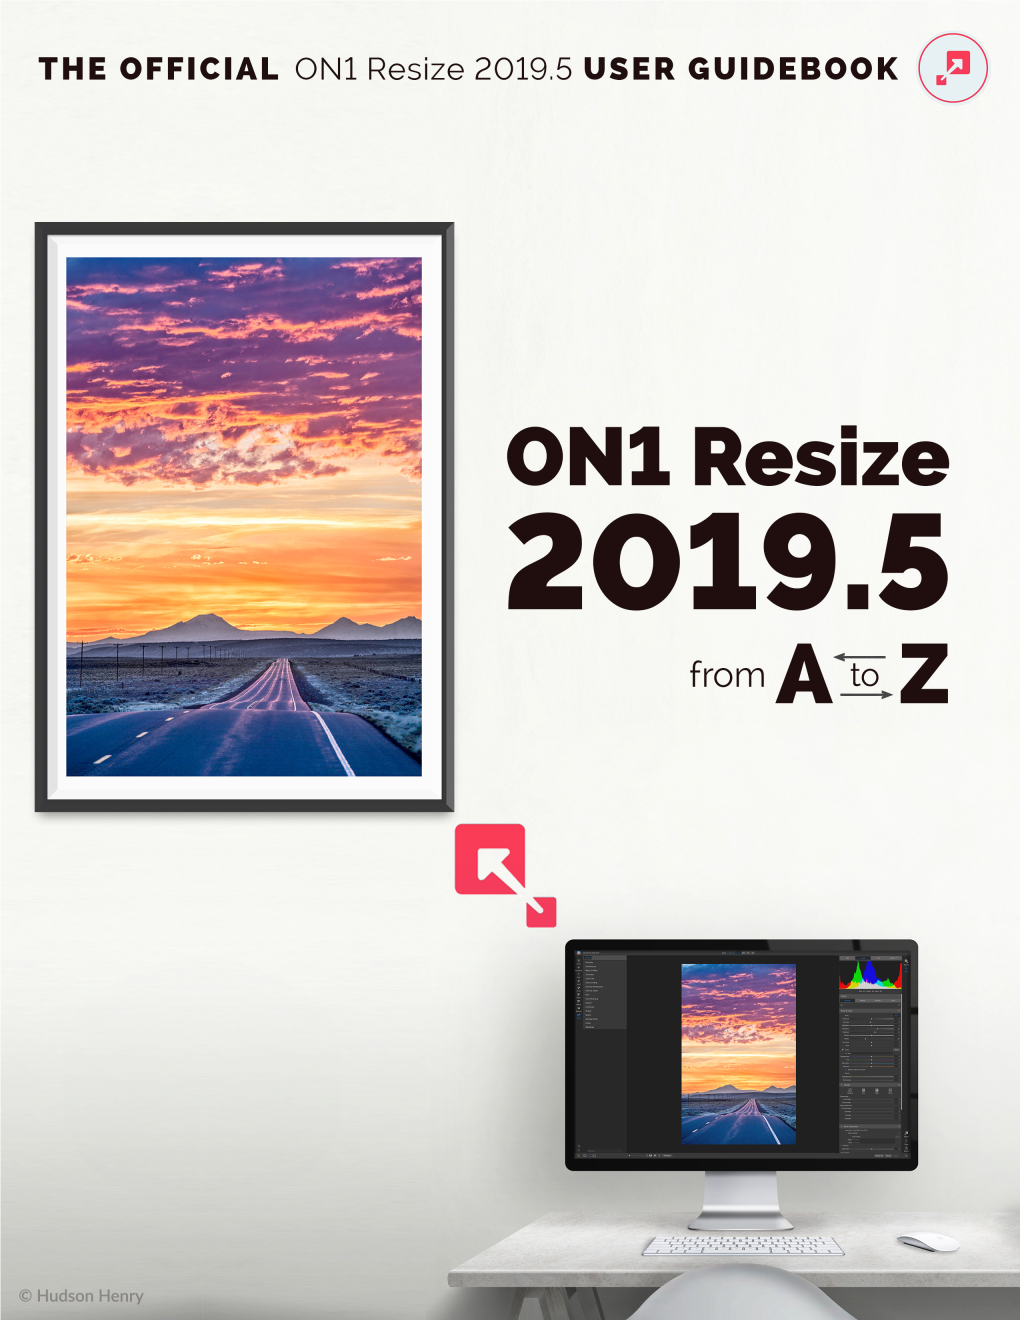 ON1 Resize 2019 Overview